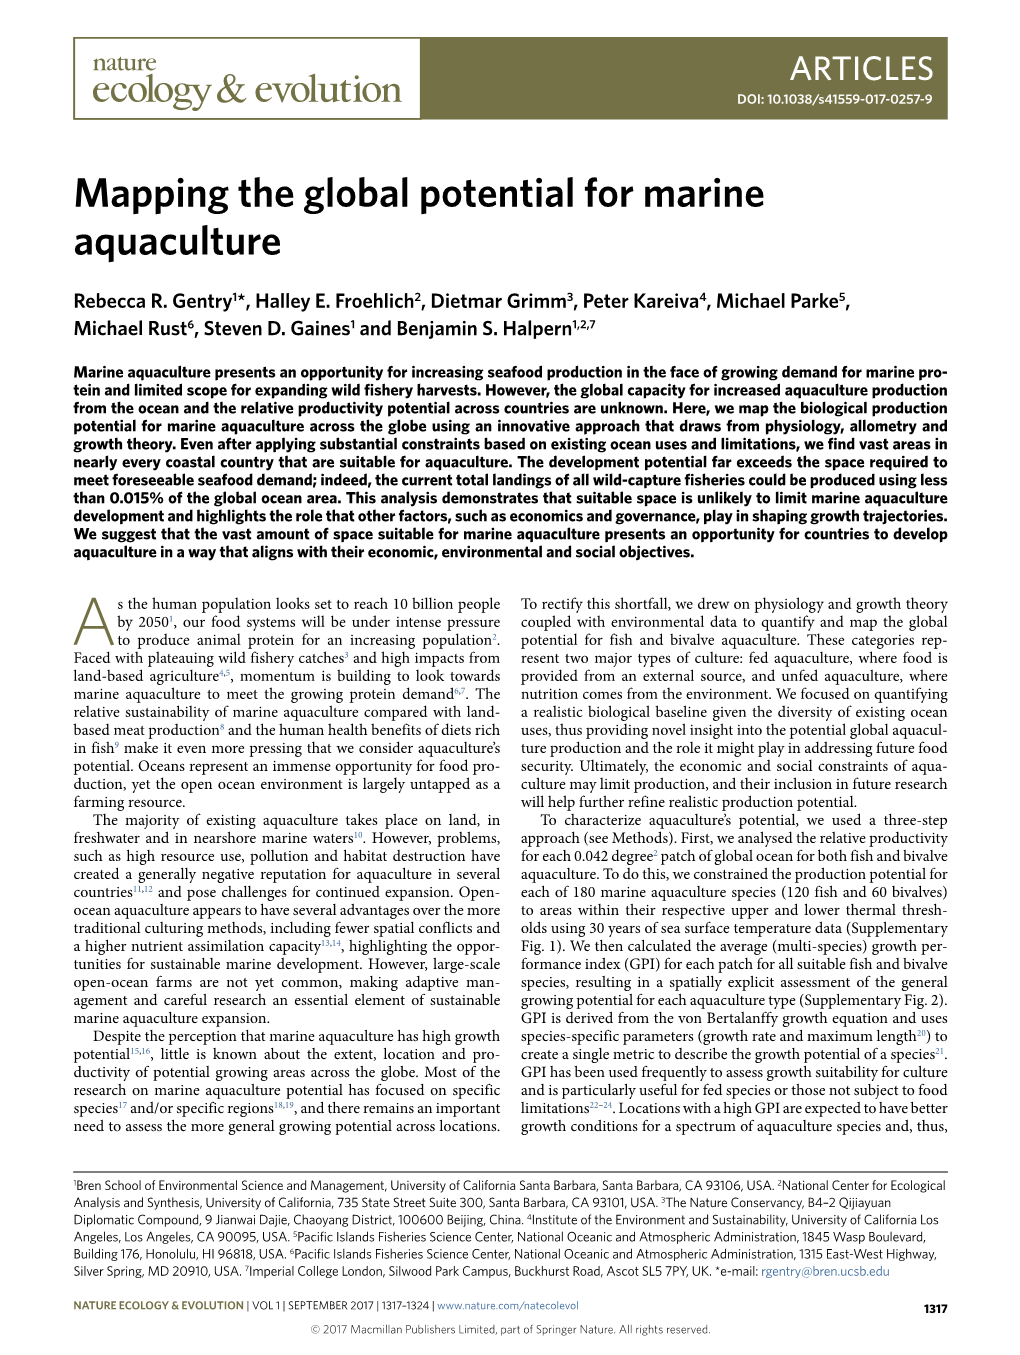 Mapping the Global Potential for Marine Aquaculture